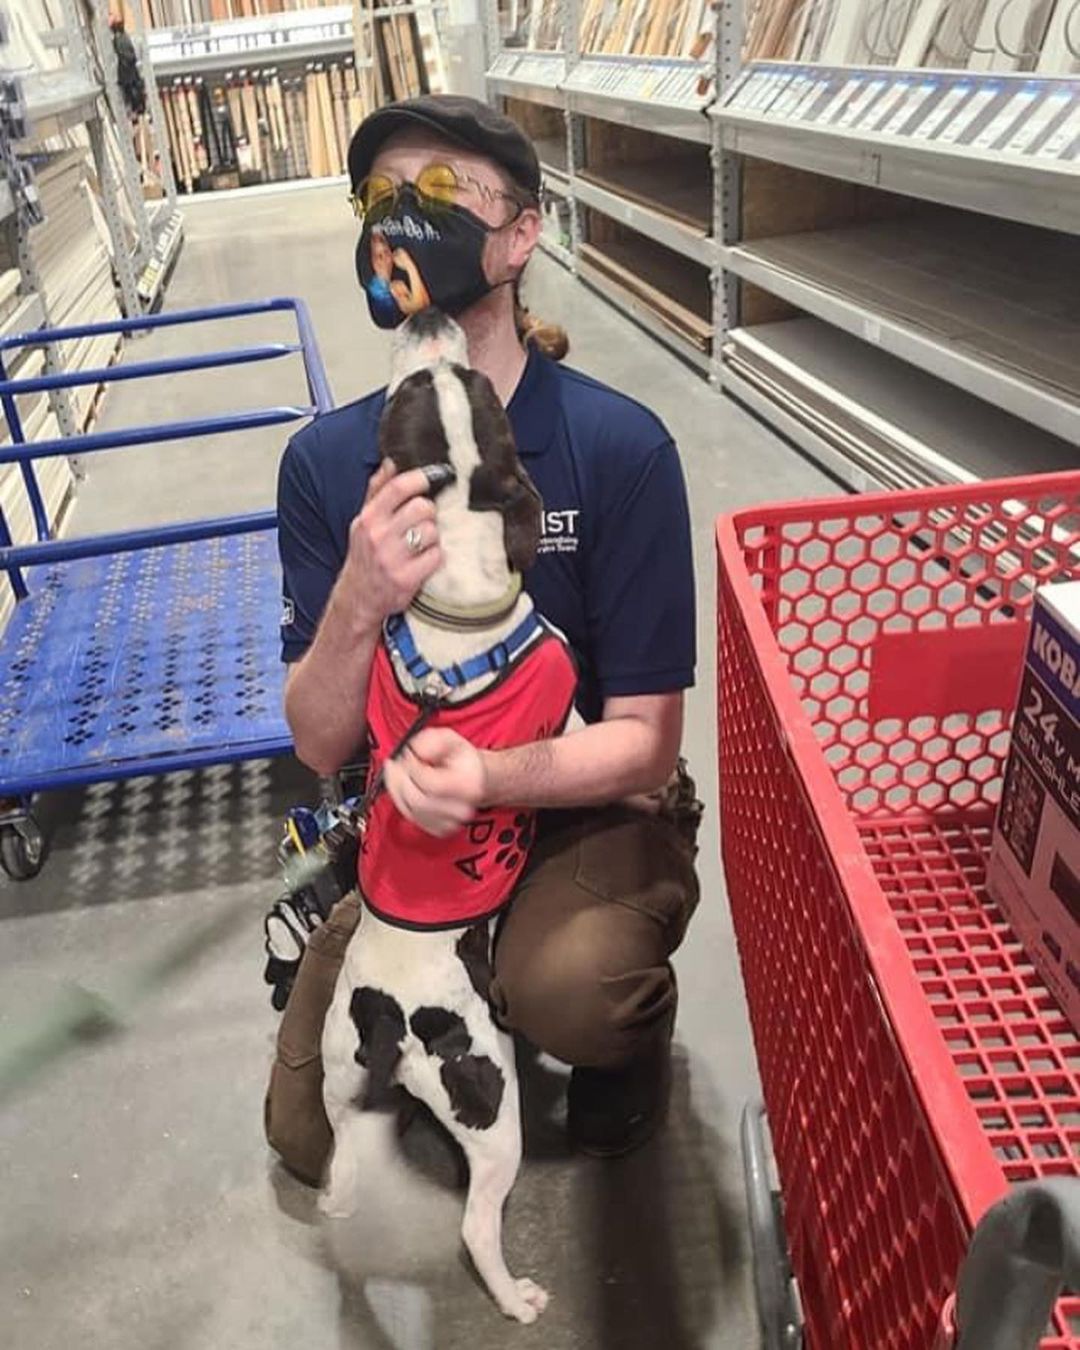 Buster enjoyed his visit to @loweshomeimprovement today, & it looks like everyone else did too! 😂
.
.
.
<a target='_blank' href='https://www.instagram.com/explore/tags/RangeRescue/'>#RangeRescue</a> <a target='_blank' href='https://www.instagram.com/explore/tags/pitbullsofinstagram/'>#pitbullsofinstagram</a>